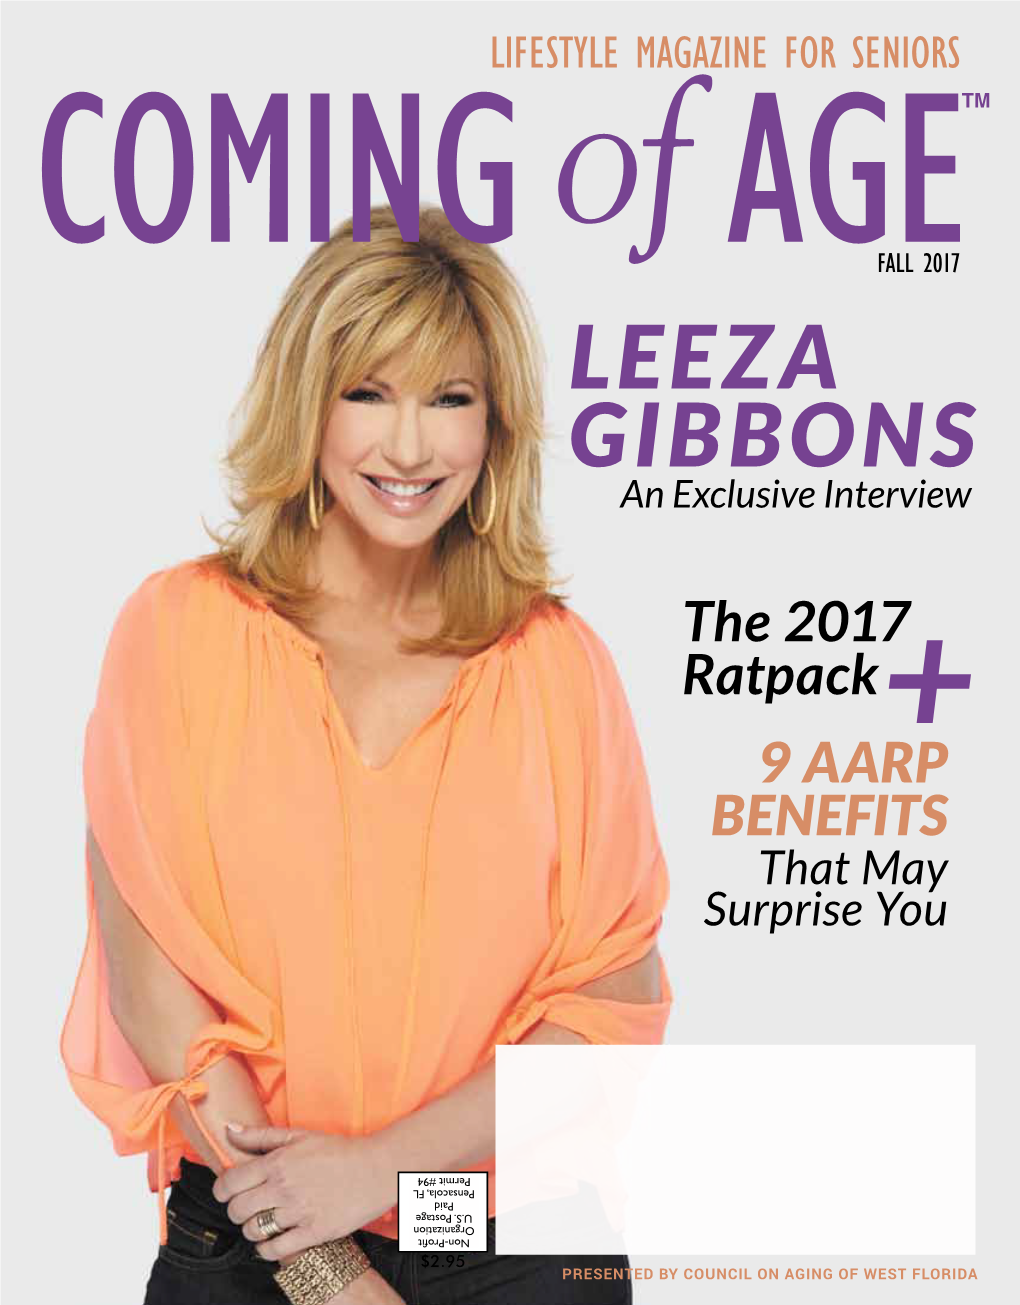 LEEZA GIBBONS an Exclusive Interview